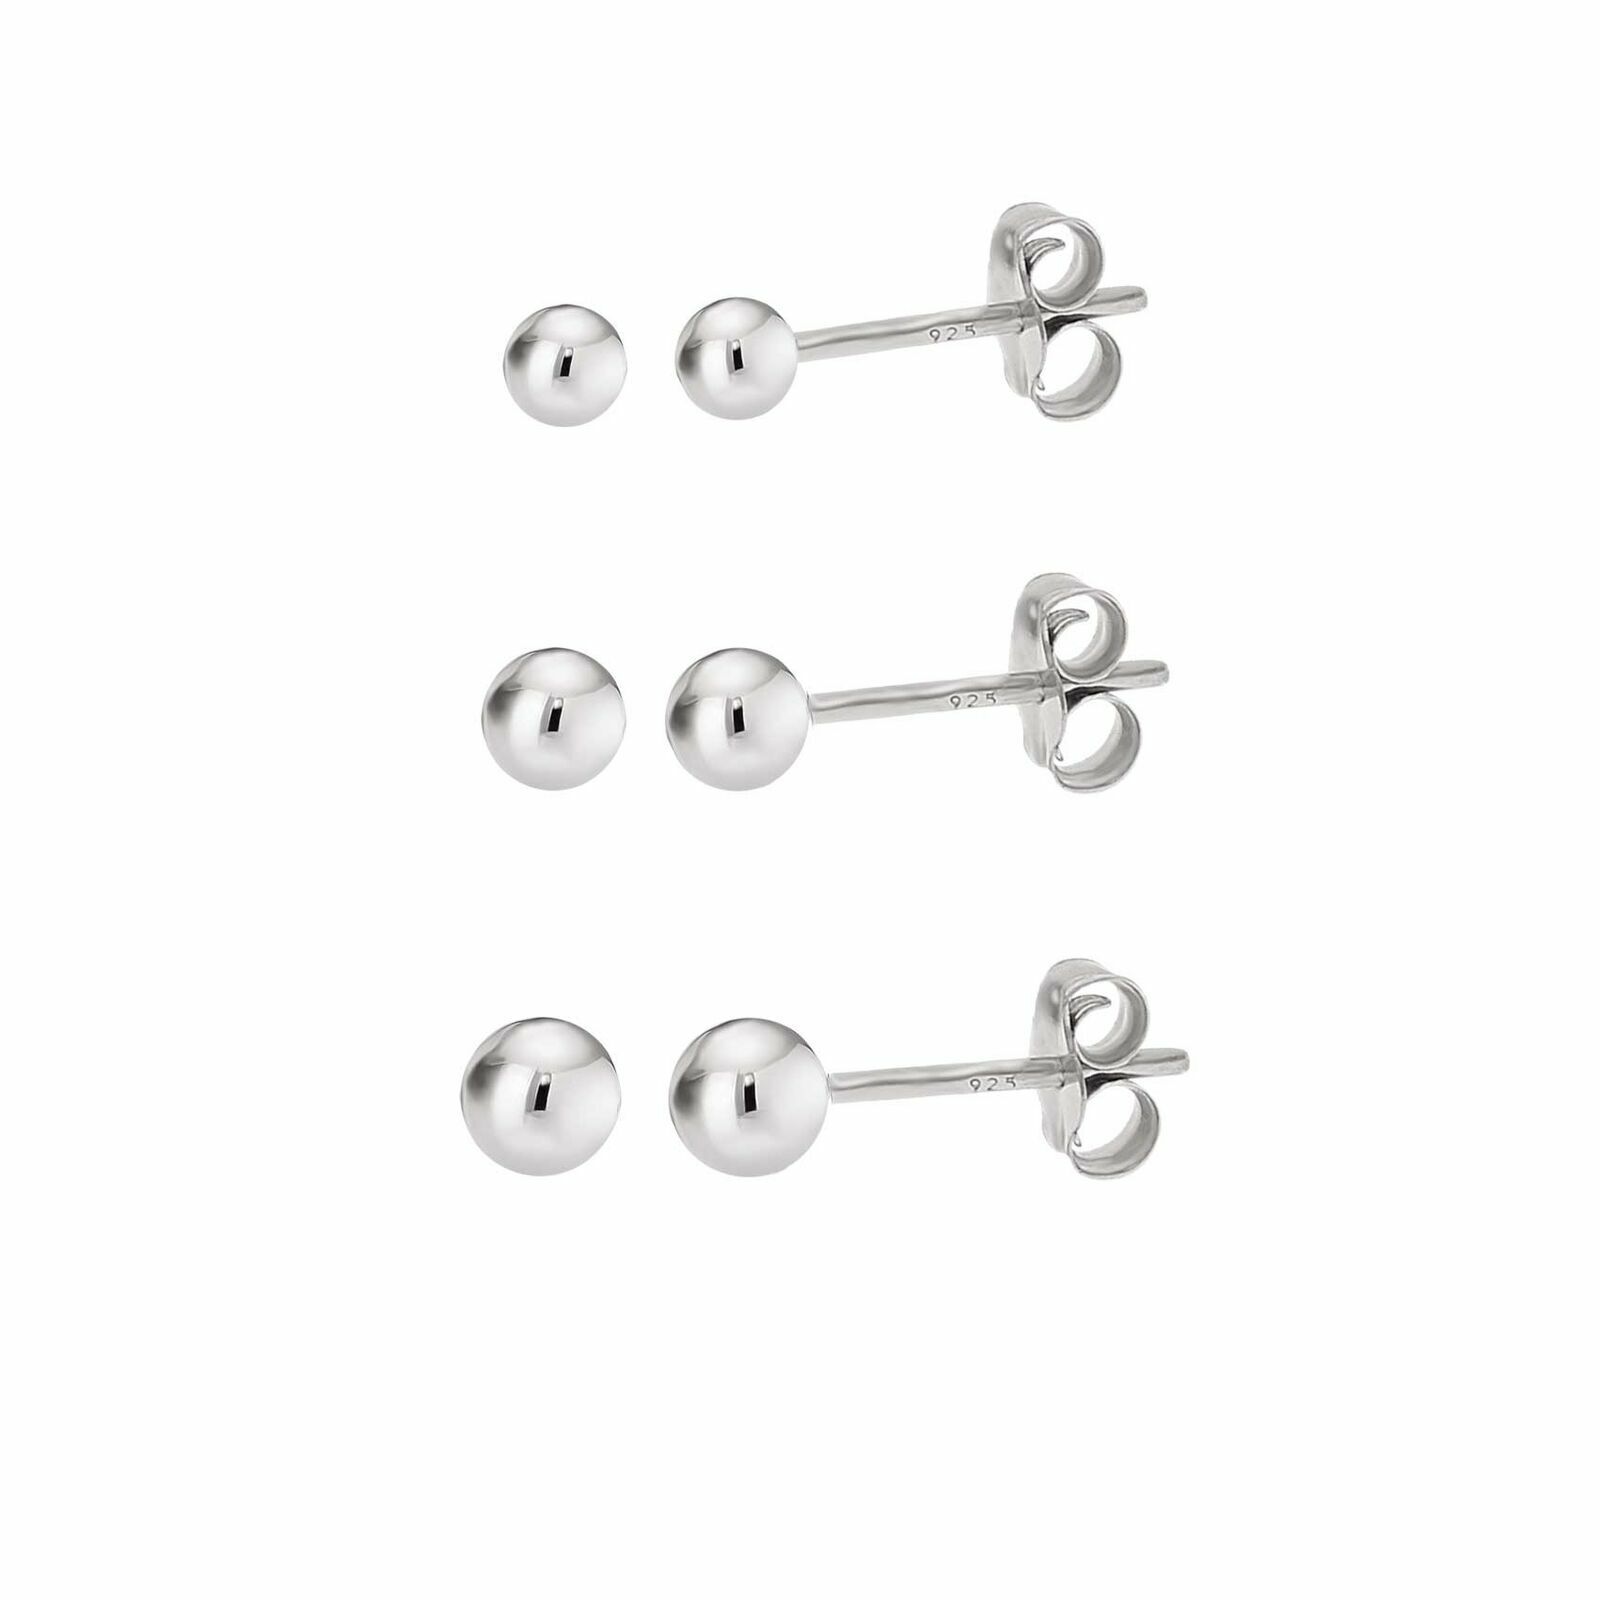 Verona Jewelers 925 Sterling Silver High Polish Smooth Round Ball Stud Earring 3-Size Set